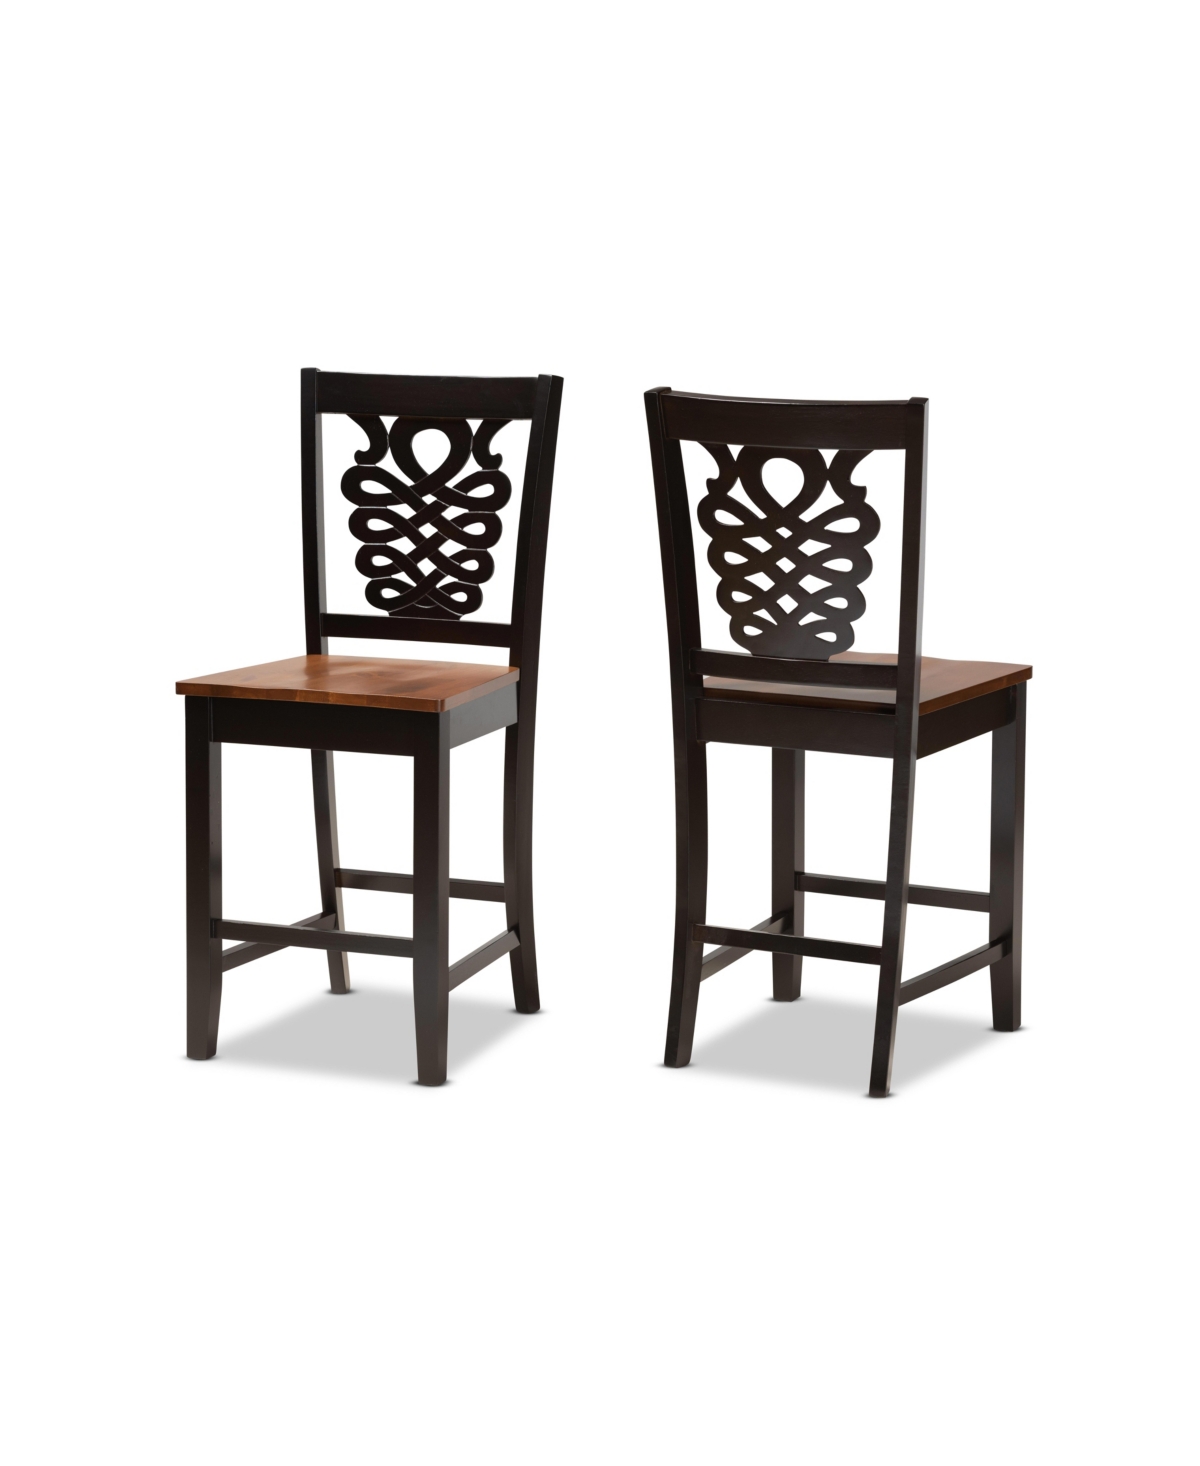 Baxton Studio Gervais Modern And Contemporary Transitional Wood Counter Stool Set, 2 Piece In Dark Brown/walnut Brown